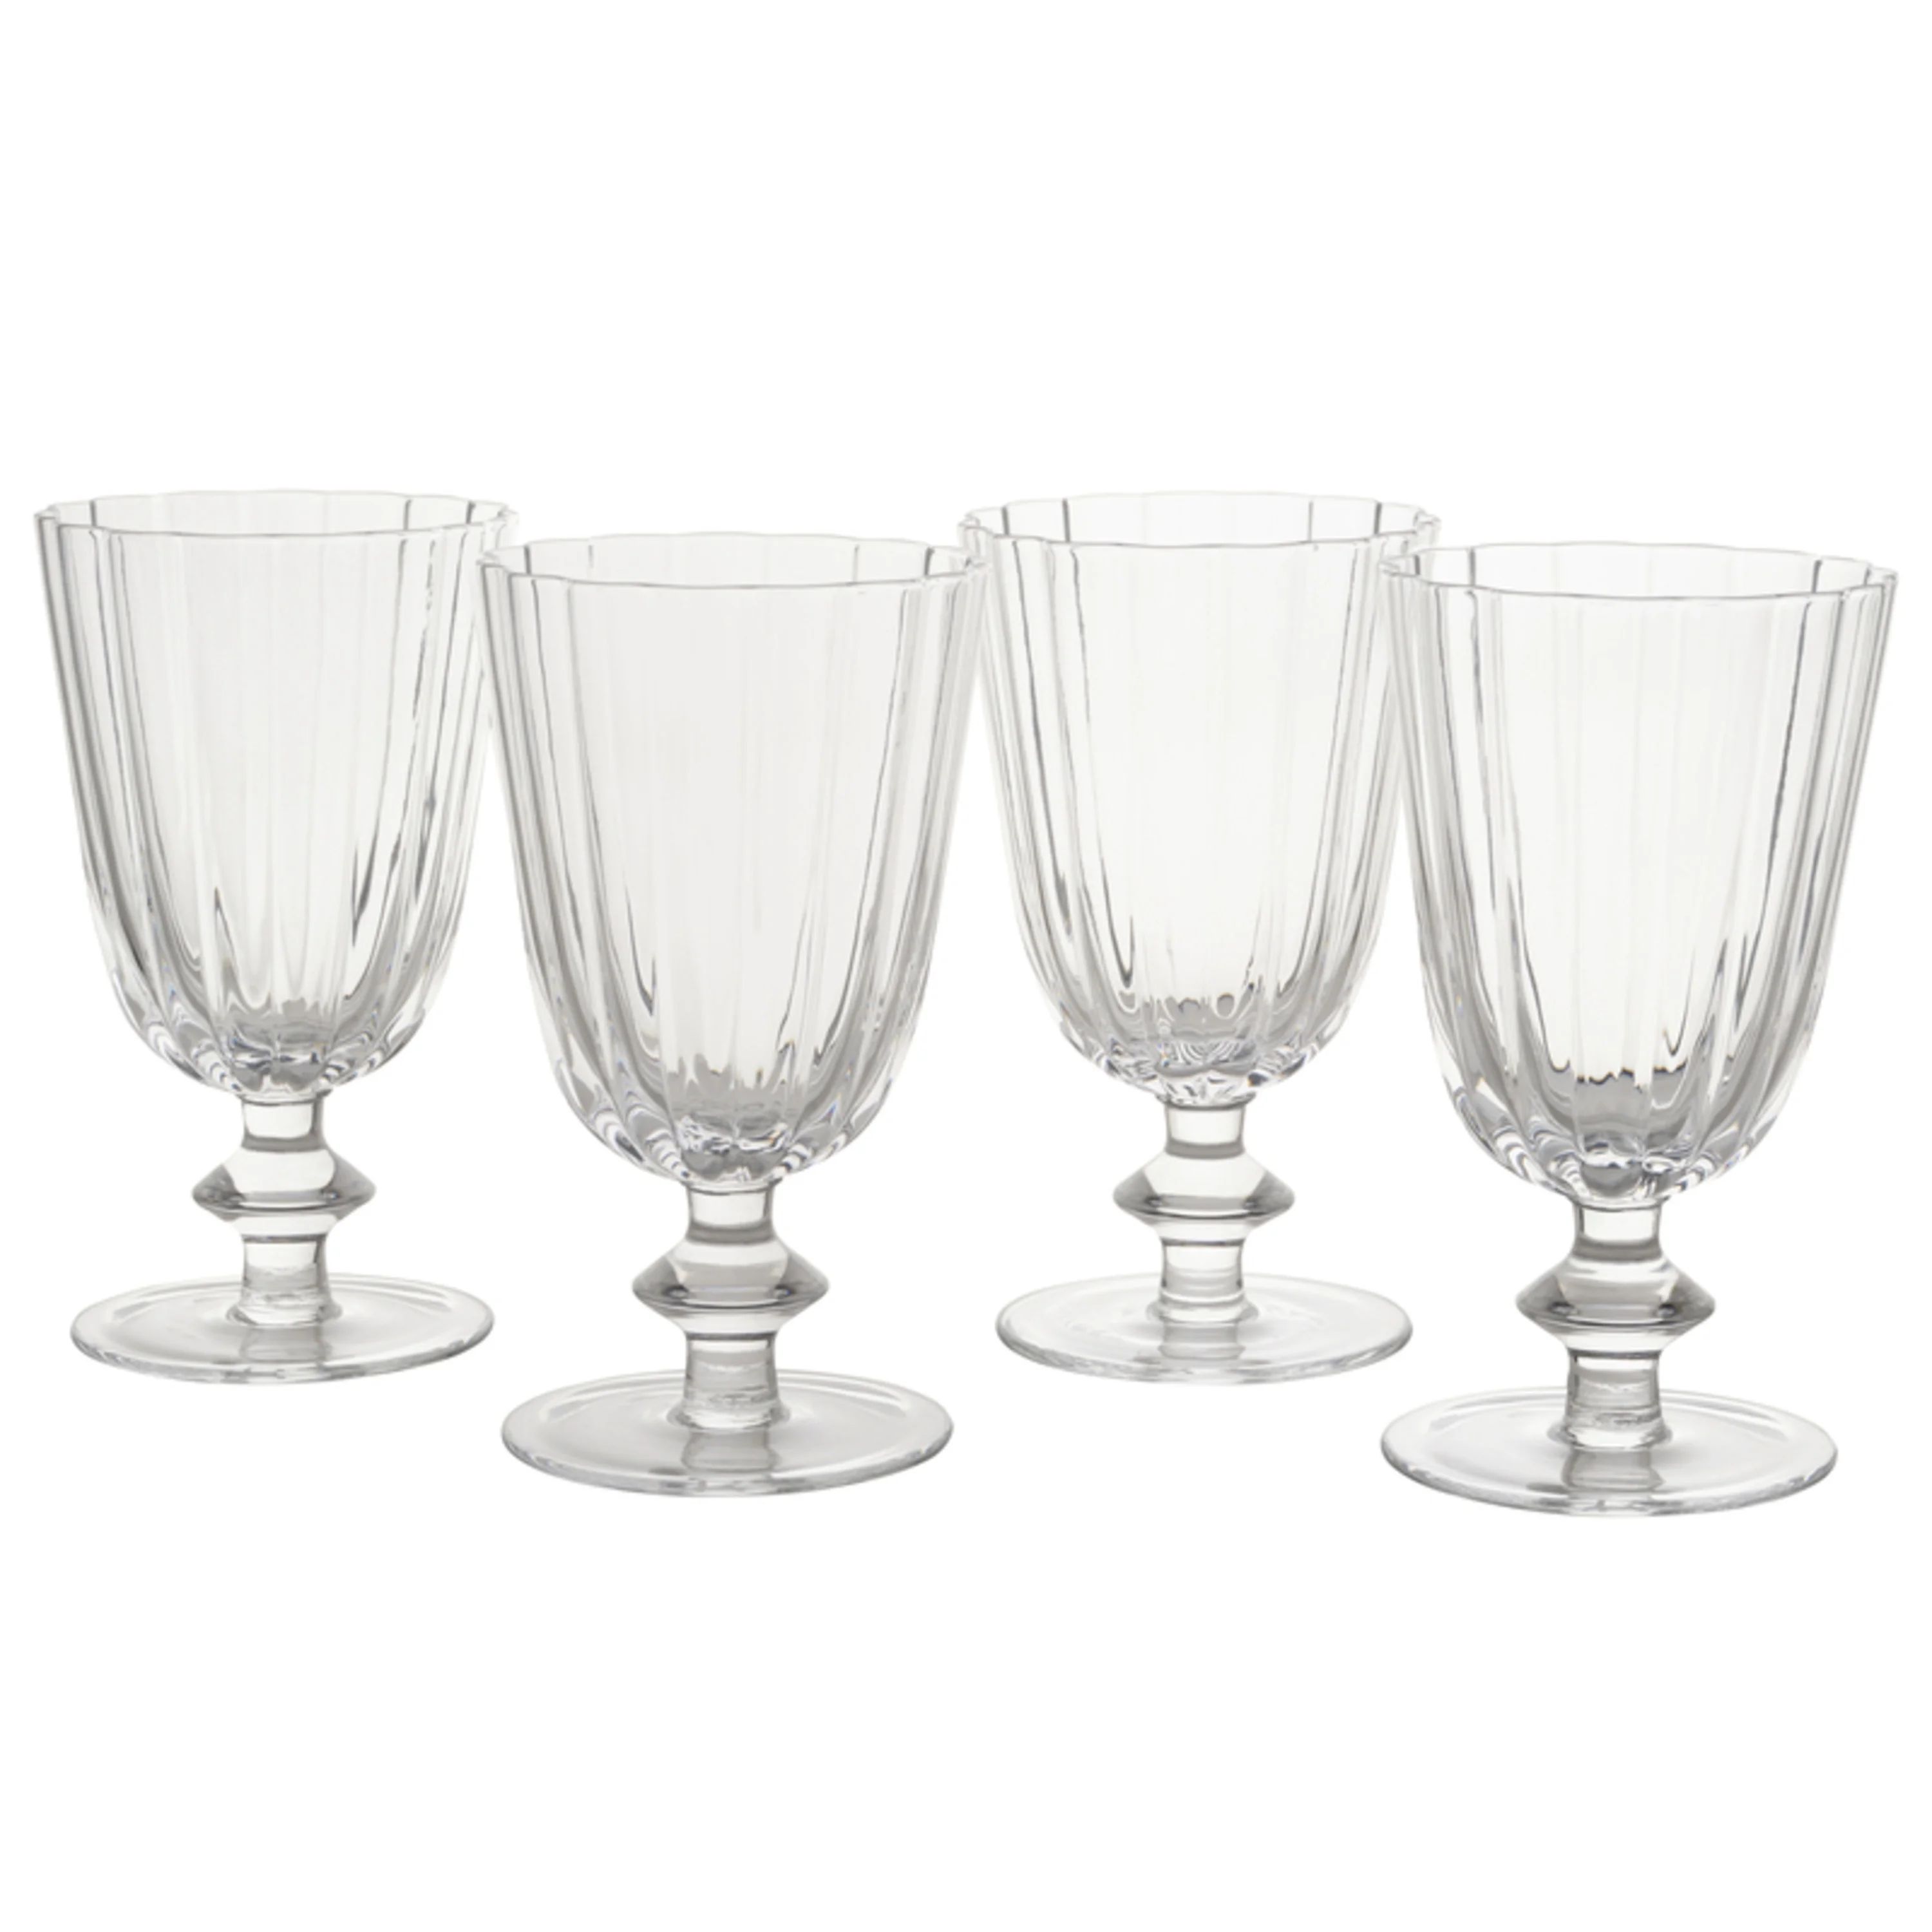 Beautiful Scallop Set of 4 Glass Goblet Clear by Drew Barrymore | Walmart (US)